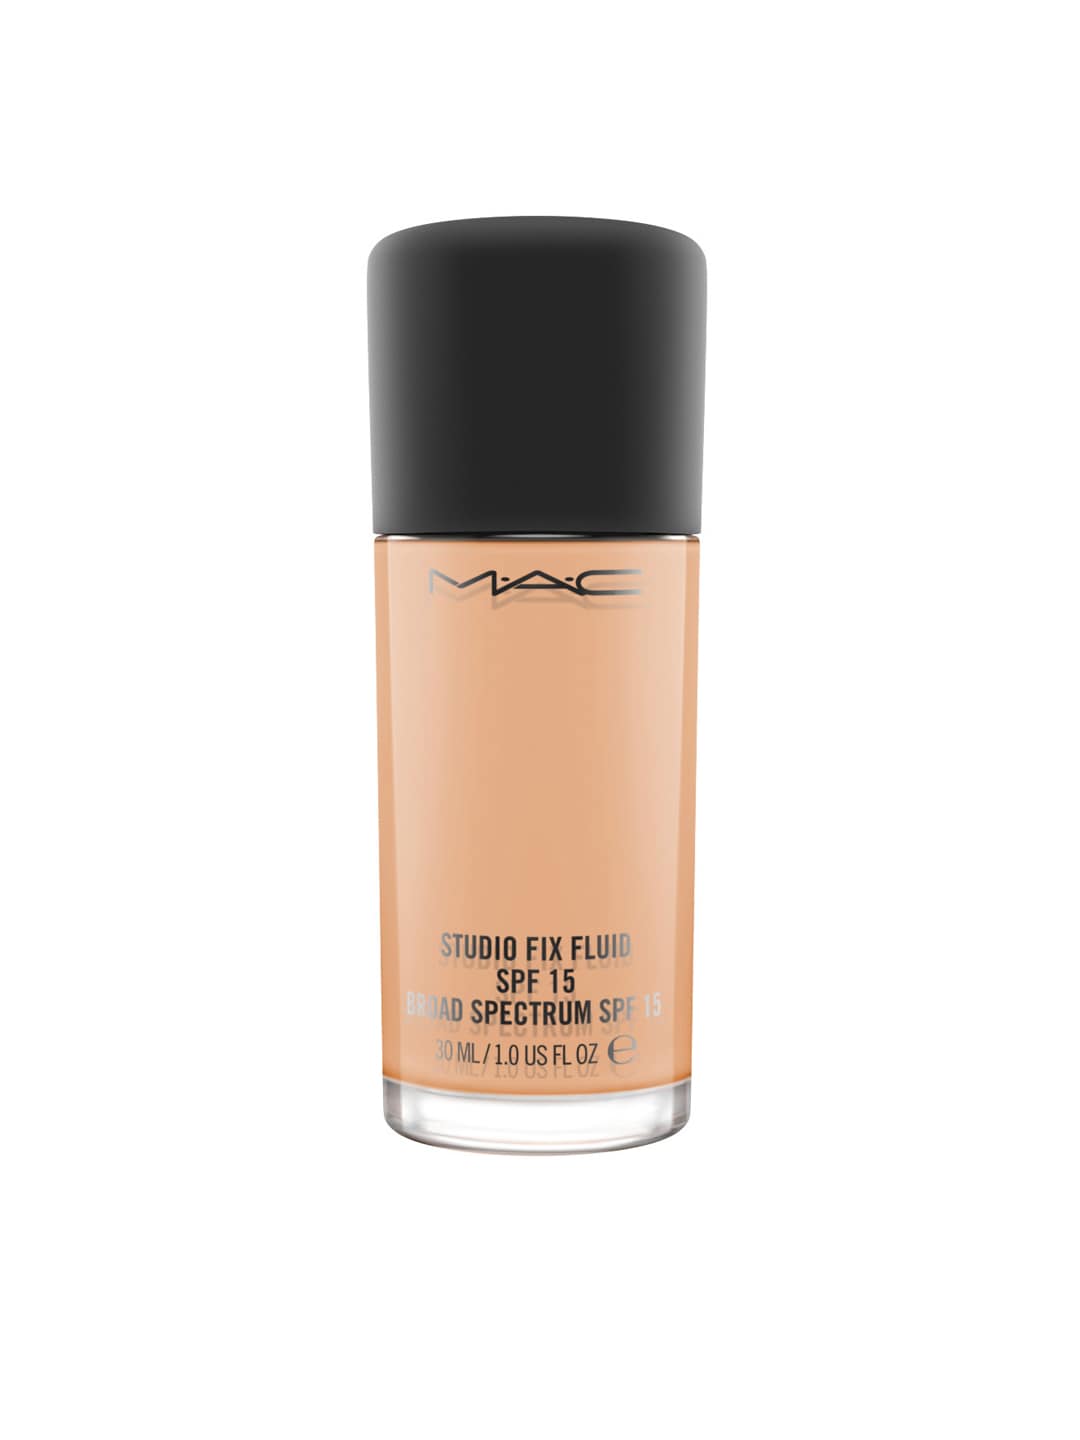 M.A.C Studio Fix Fluid Broad Spectrum Foundation with SPF 15 - NW30 30 ml Price in India